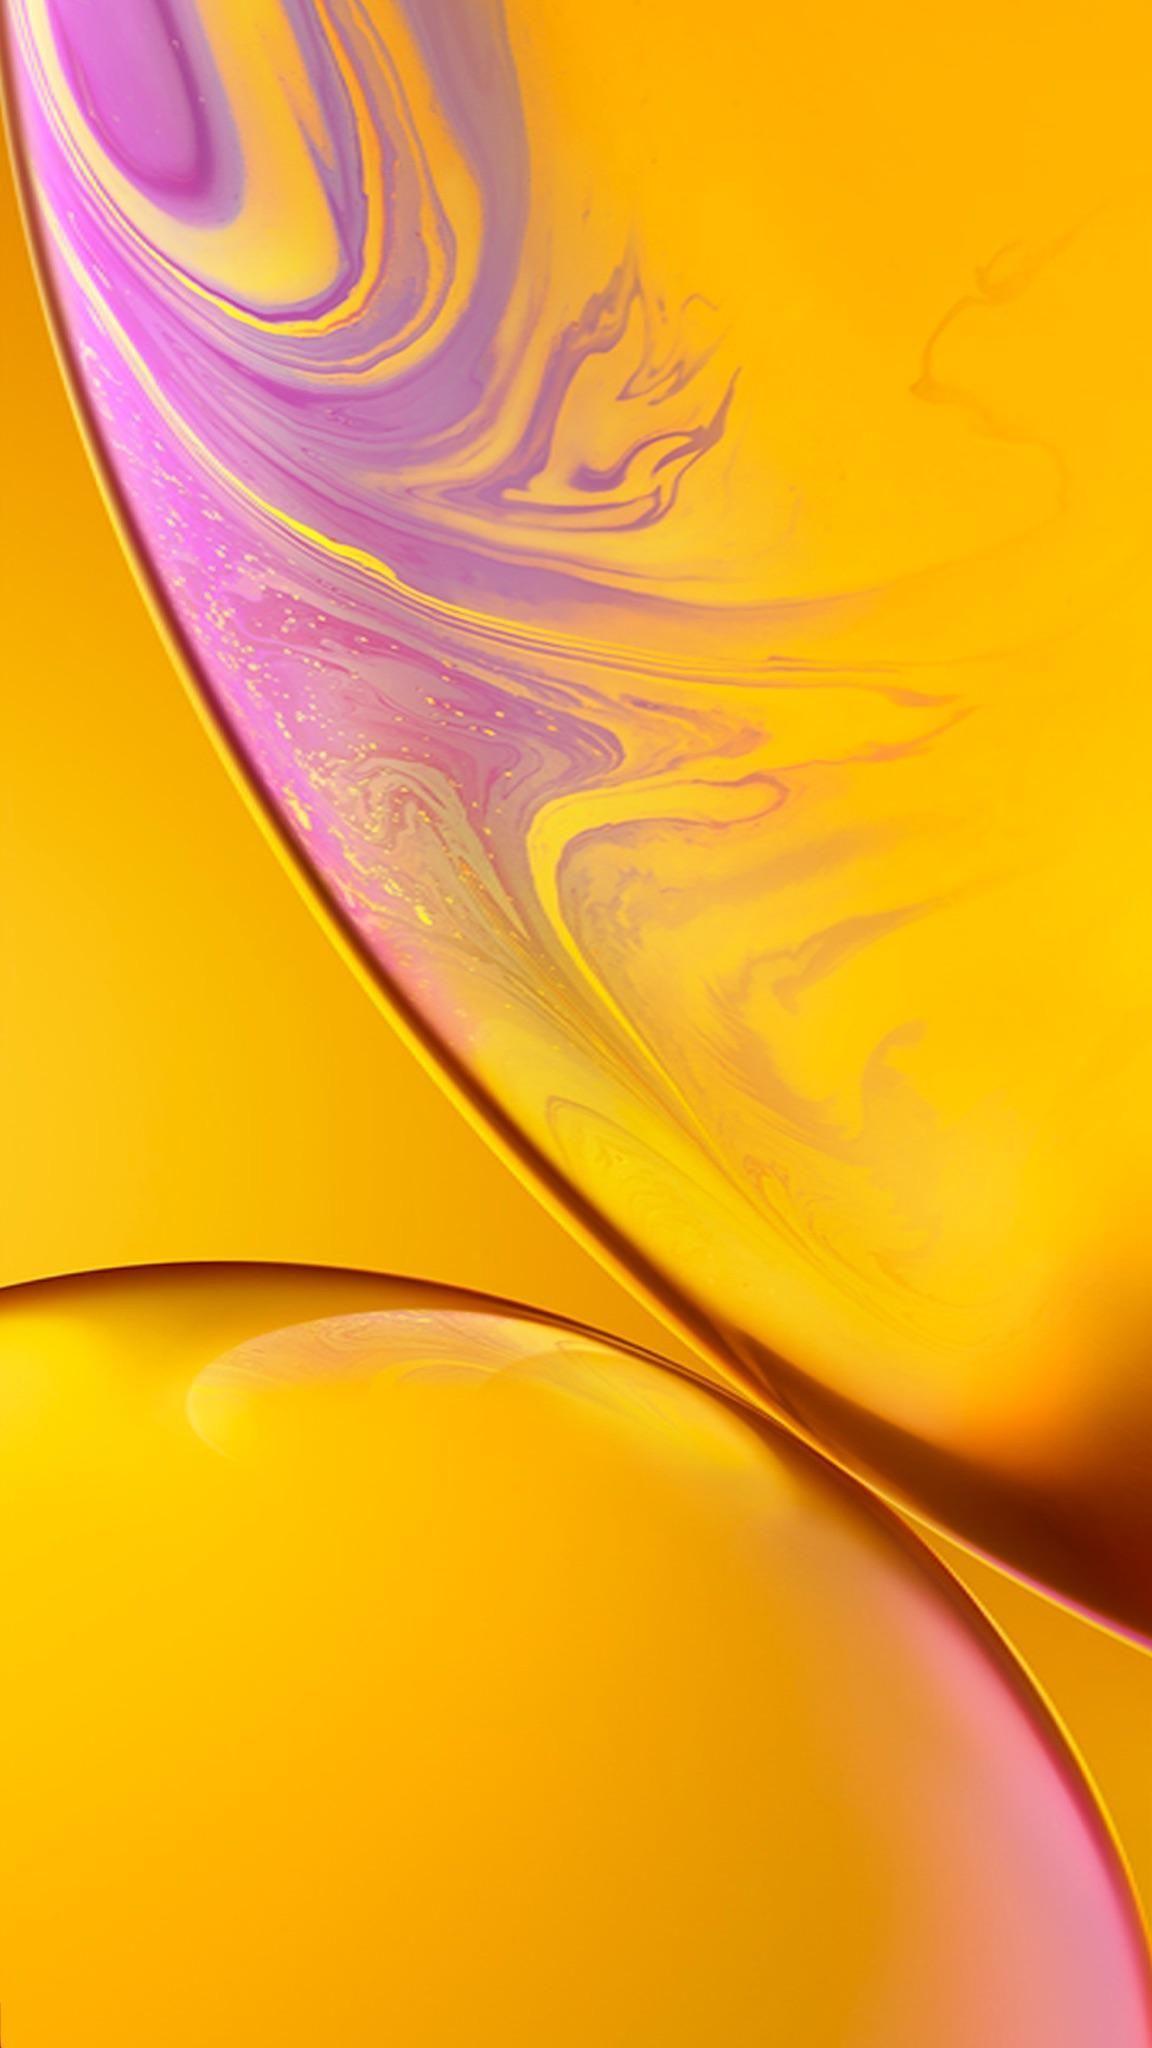 Apple iPhone XR Wallpapers Free Download  Allpicts  Wallpaper High  resolution wallpapers Iphone homescreen wallpaper